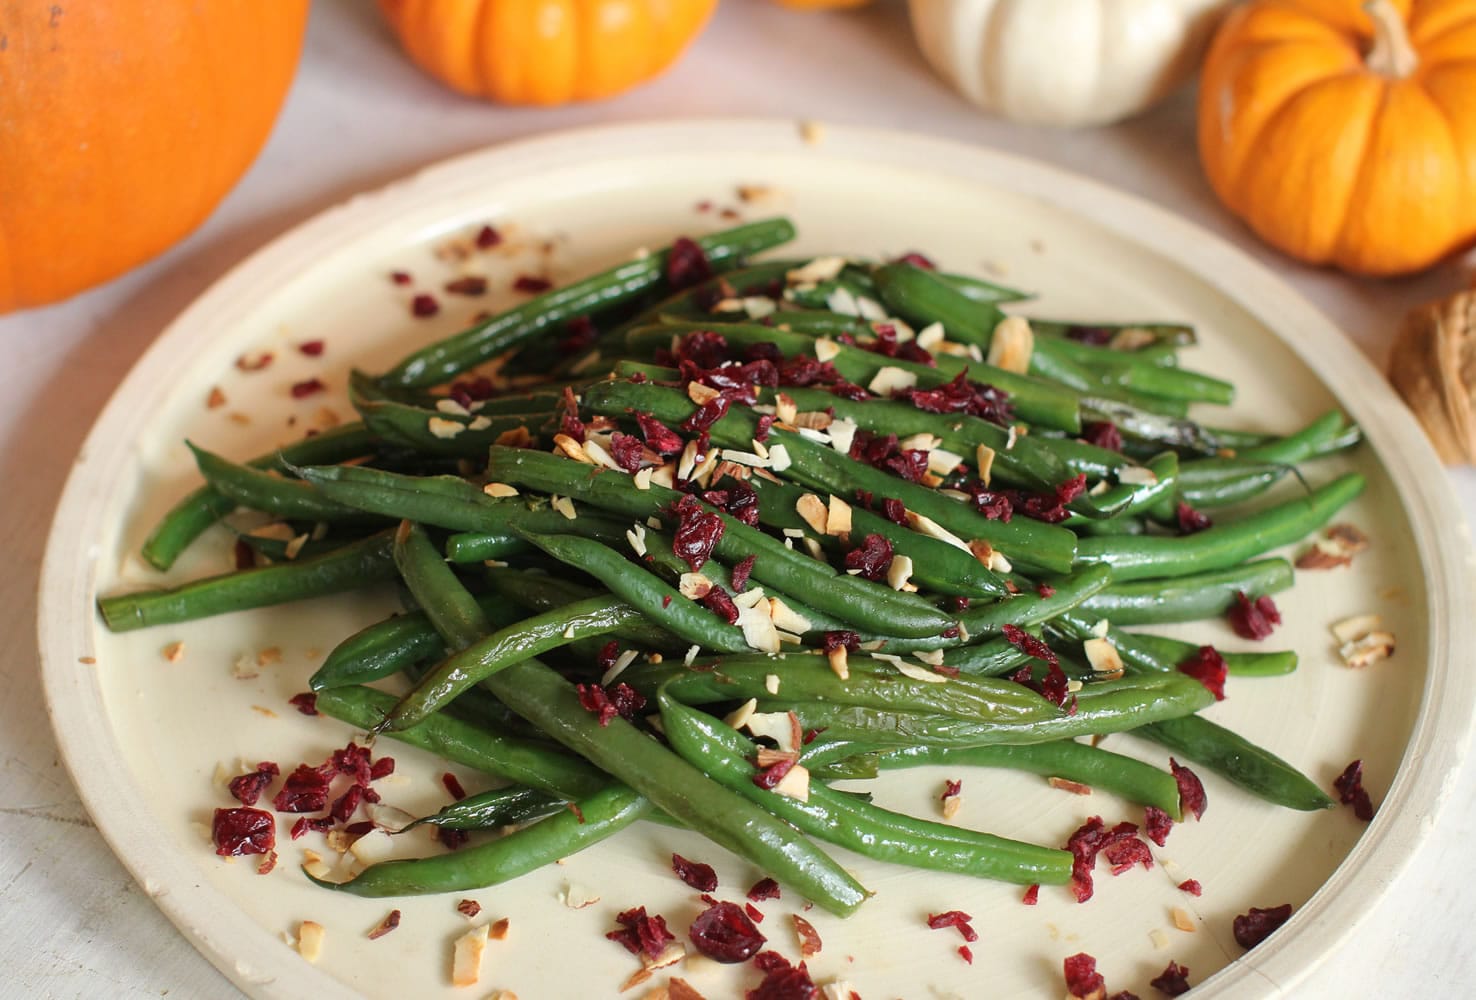 Cranberries and nuts liven up green beans for the holidays.